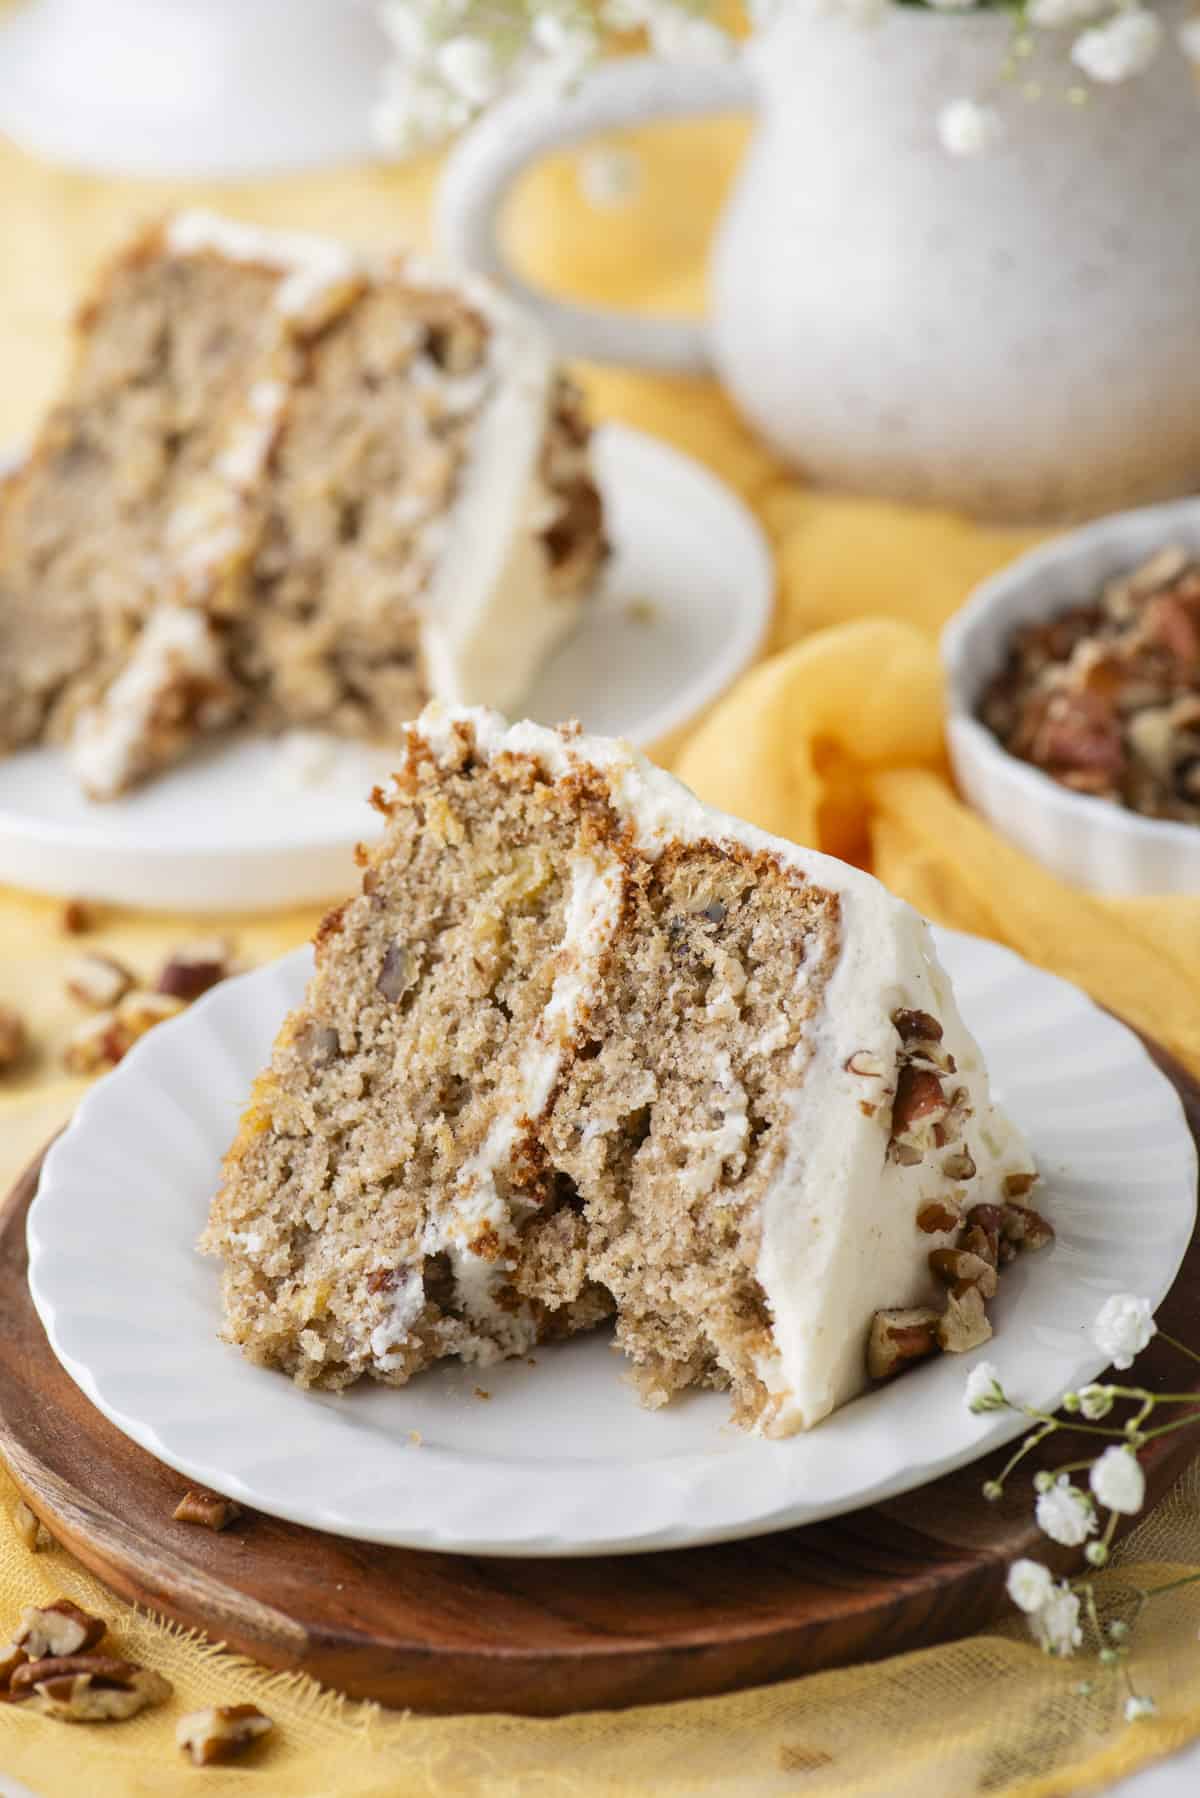 a slice of hummingbird cake on a white plate on top of a wooden circle, with one bite missing from the cake, chopped pecans sprinkled around, some white flowers in the corner and another plate with a slice of cake and a dish of pecans in the background